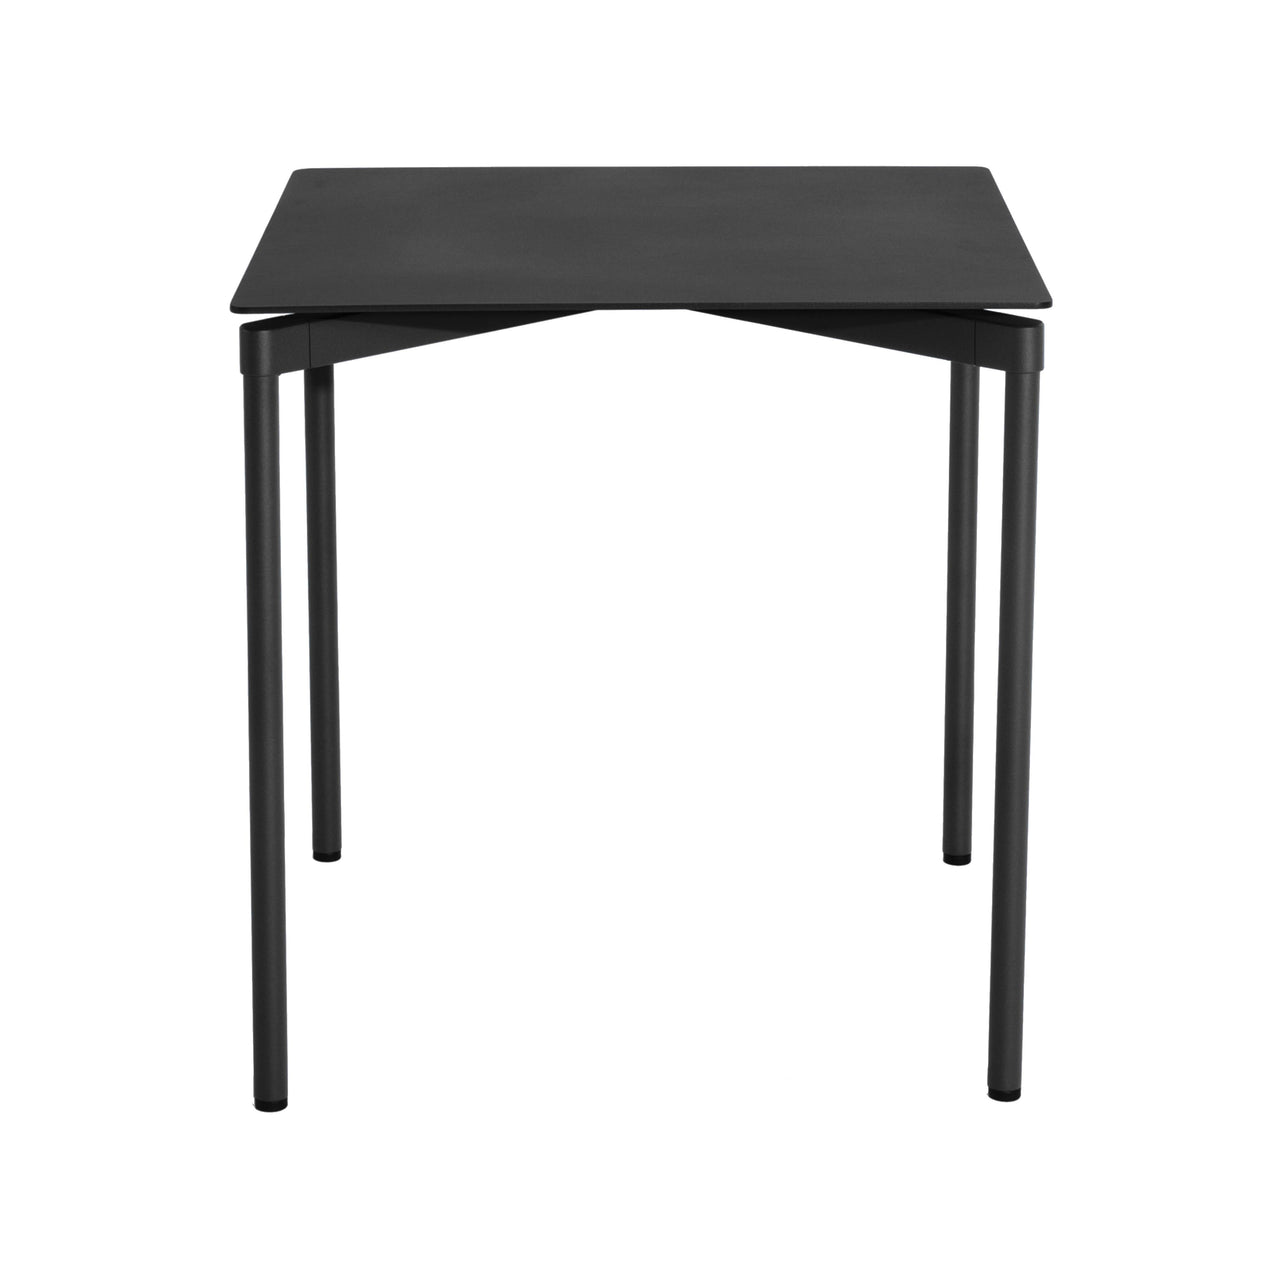 Fromme Table: Square + Black